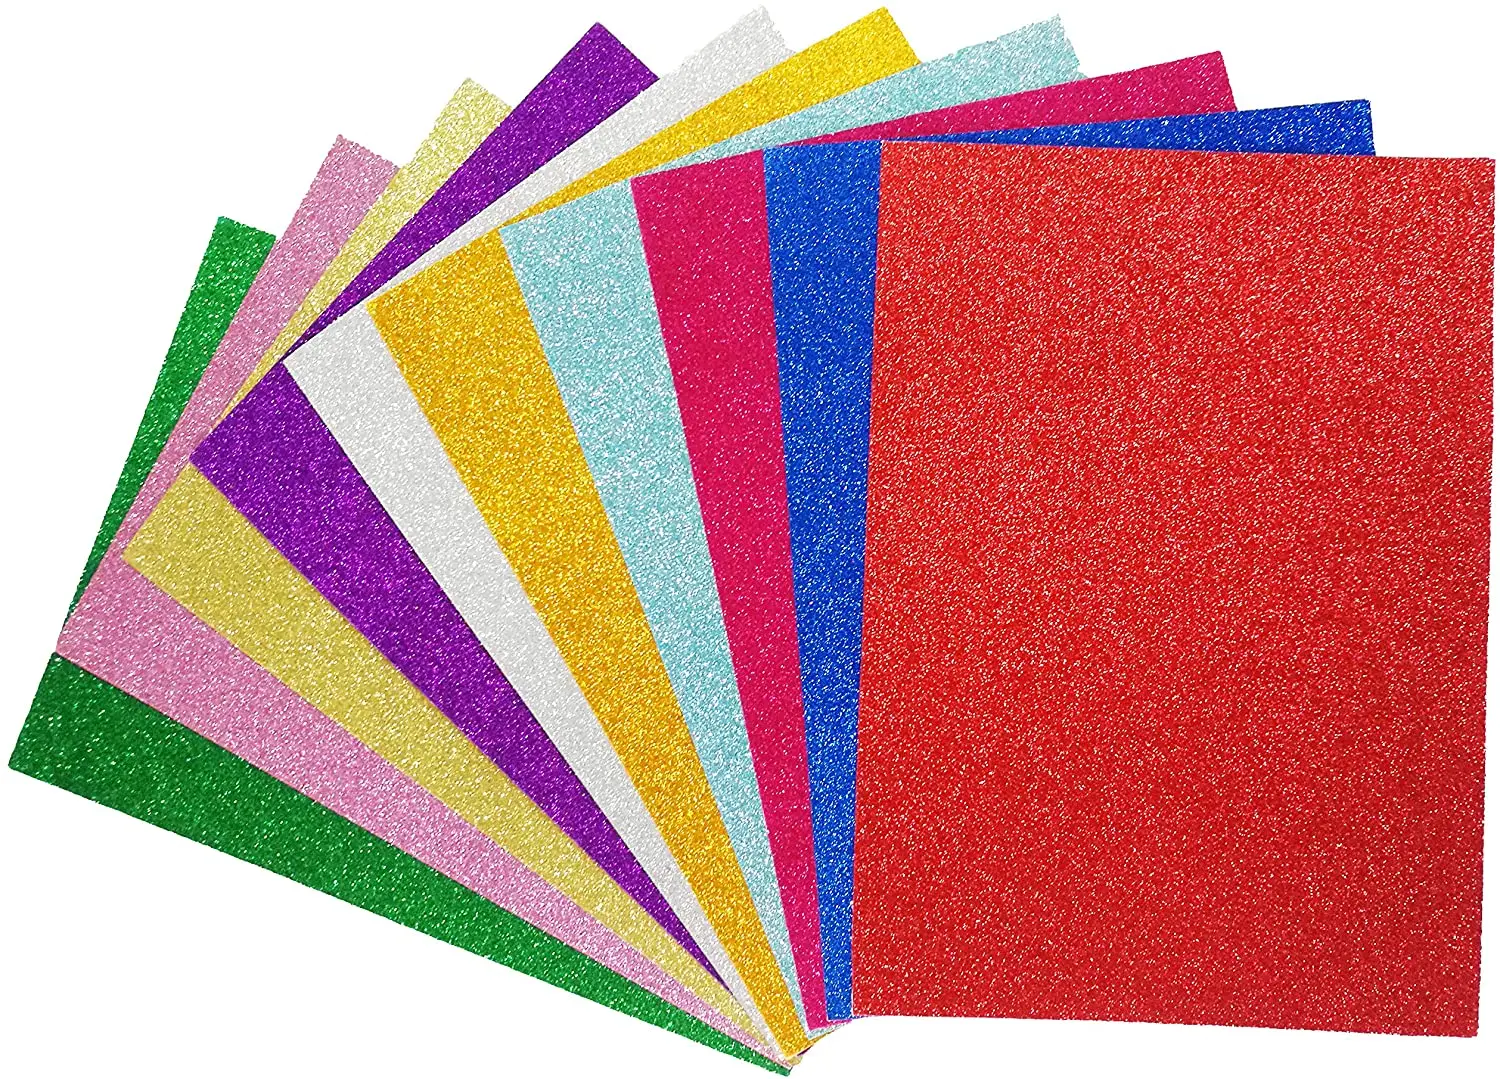 FEILIBAY 20 Sheets Pink Glitter Cardstock Paper A4 Size Glitter Paper for  Cra